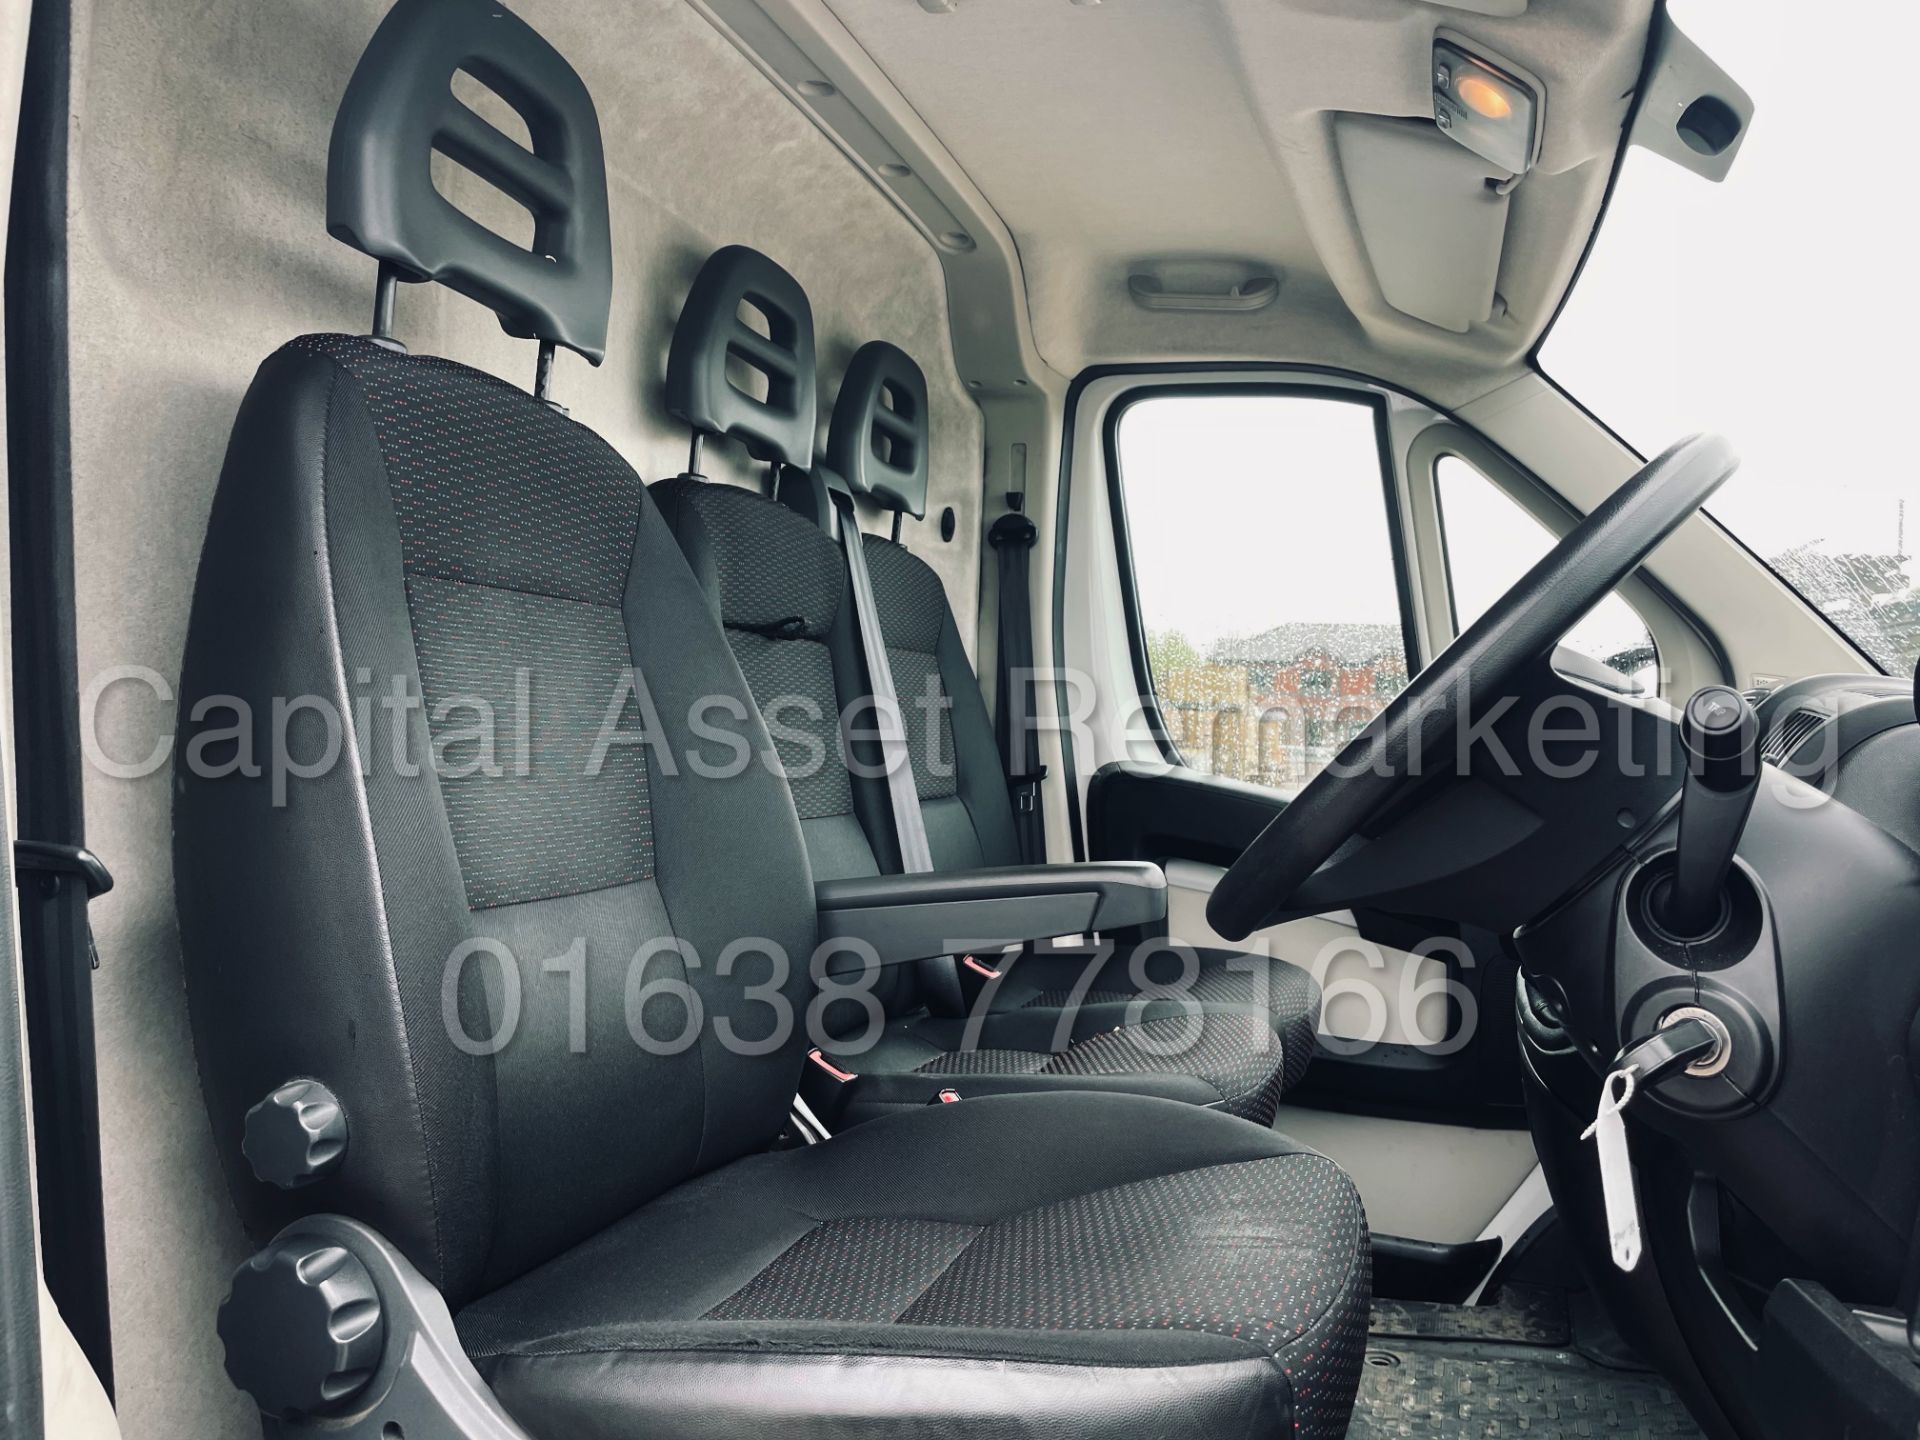 (On Sale) PEUGEOT BOXER 335 *PROFESSIONAL* LWB HI-ROOF (2016) '2.2 HDI - 6 SPEED' *A/C* (1 OWNER) - Image 25 of 41